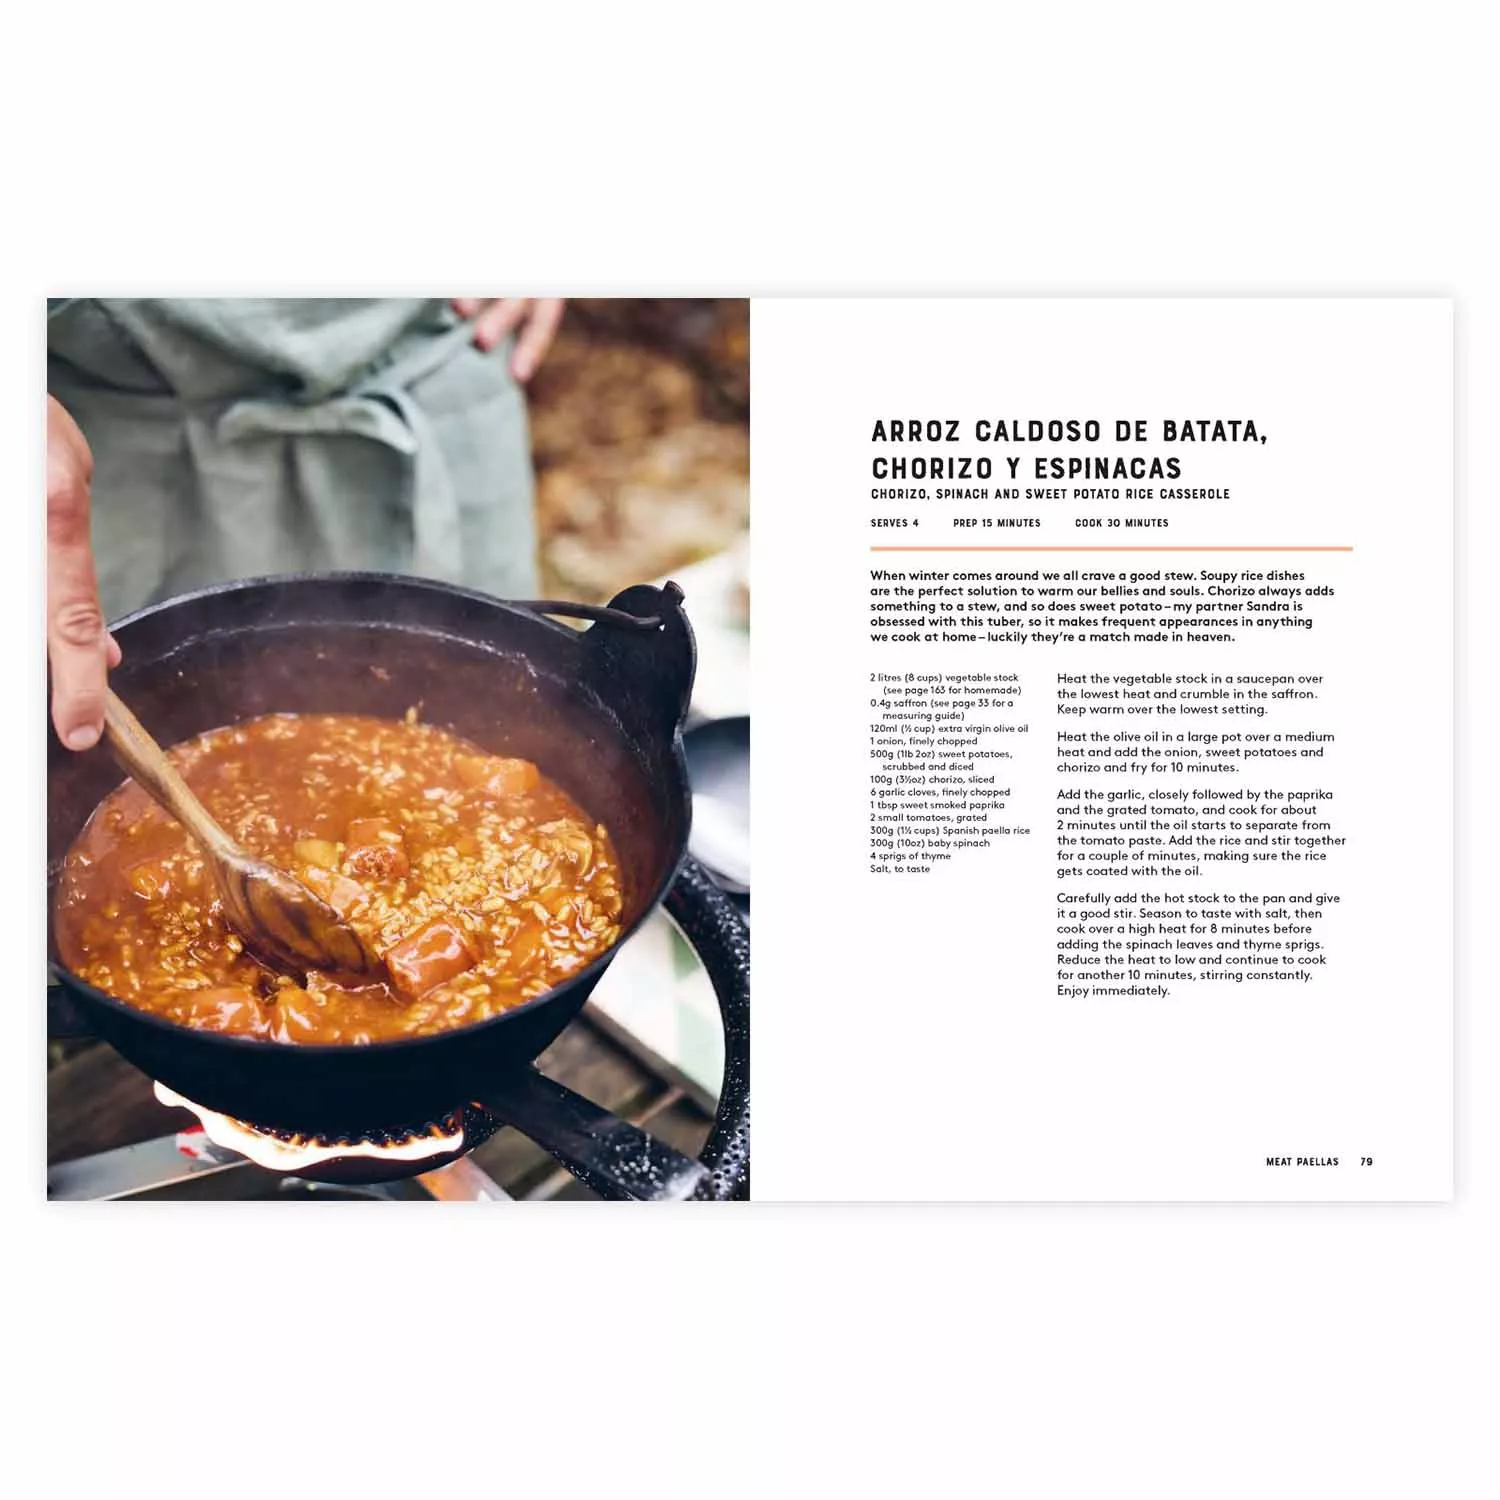 Paella: The Original One-Pan Dish: Over 50 Recipes for the Spanish Classic 